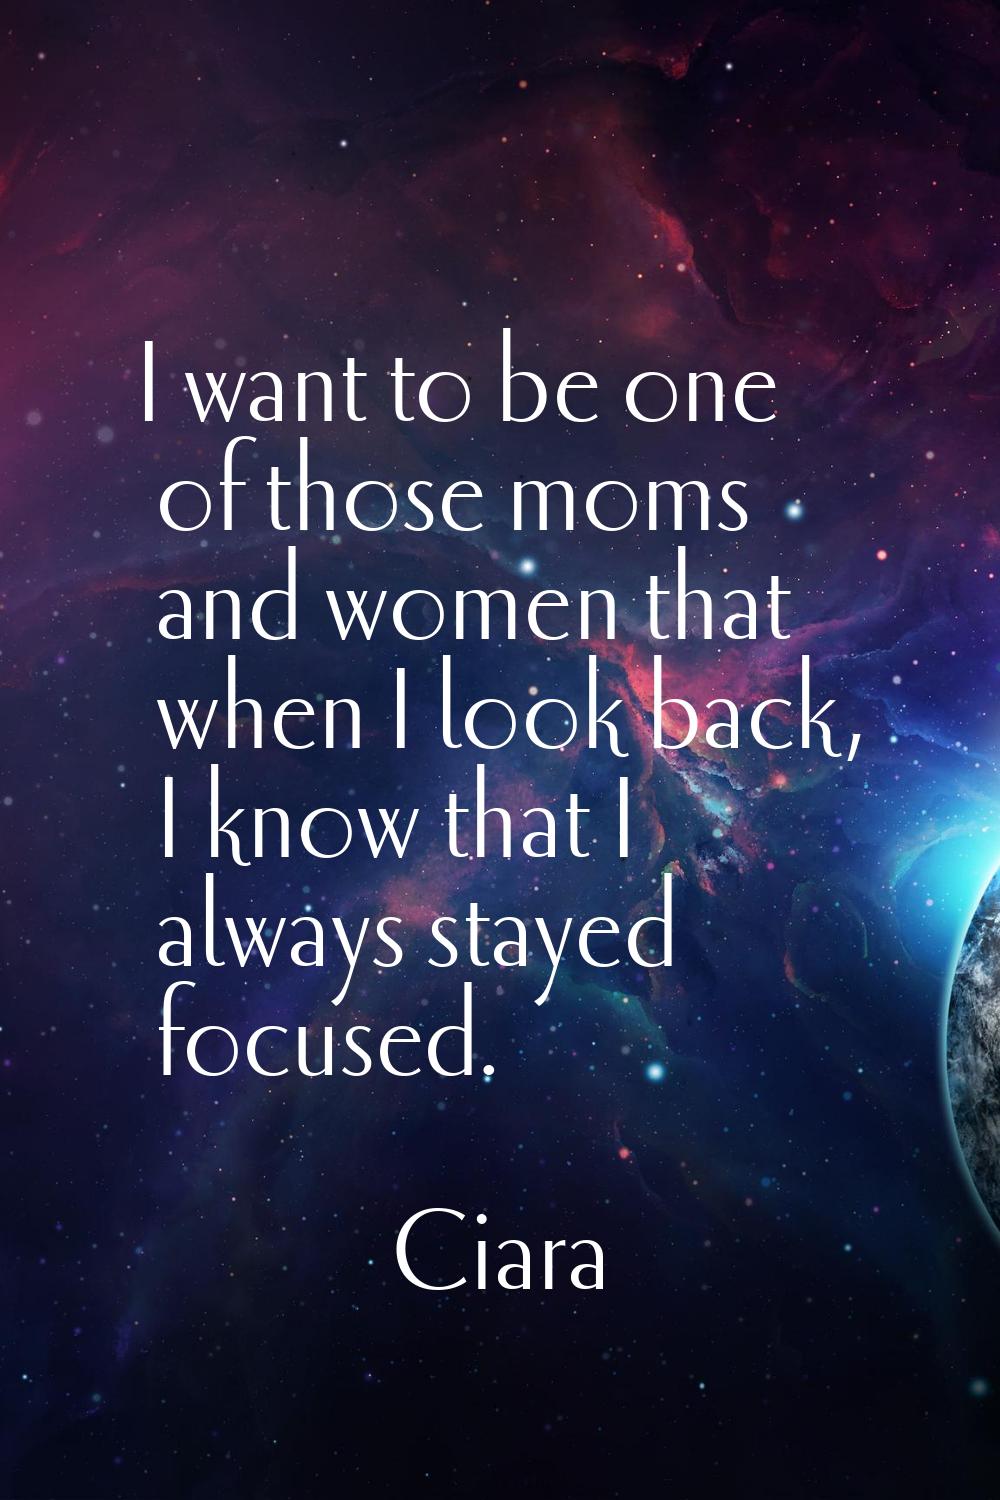 I want to be one of those moms and women that when I look back, I know that I always stayed focused